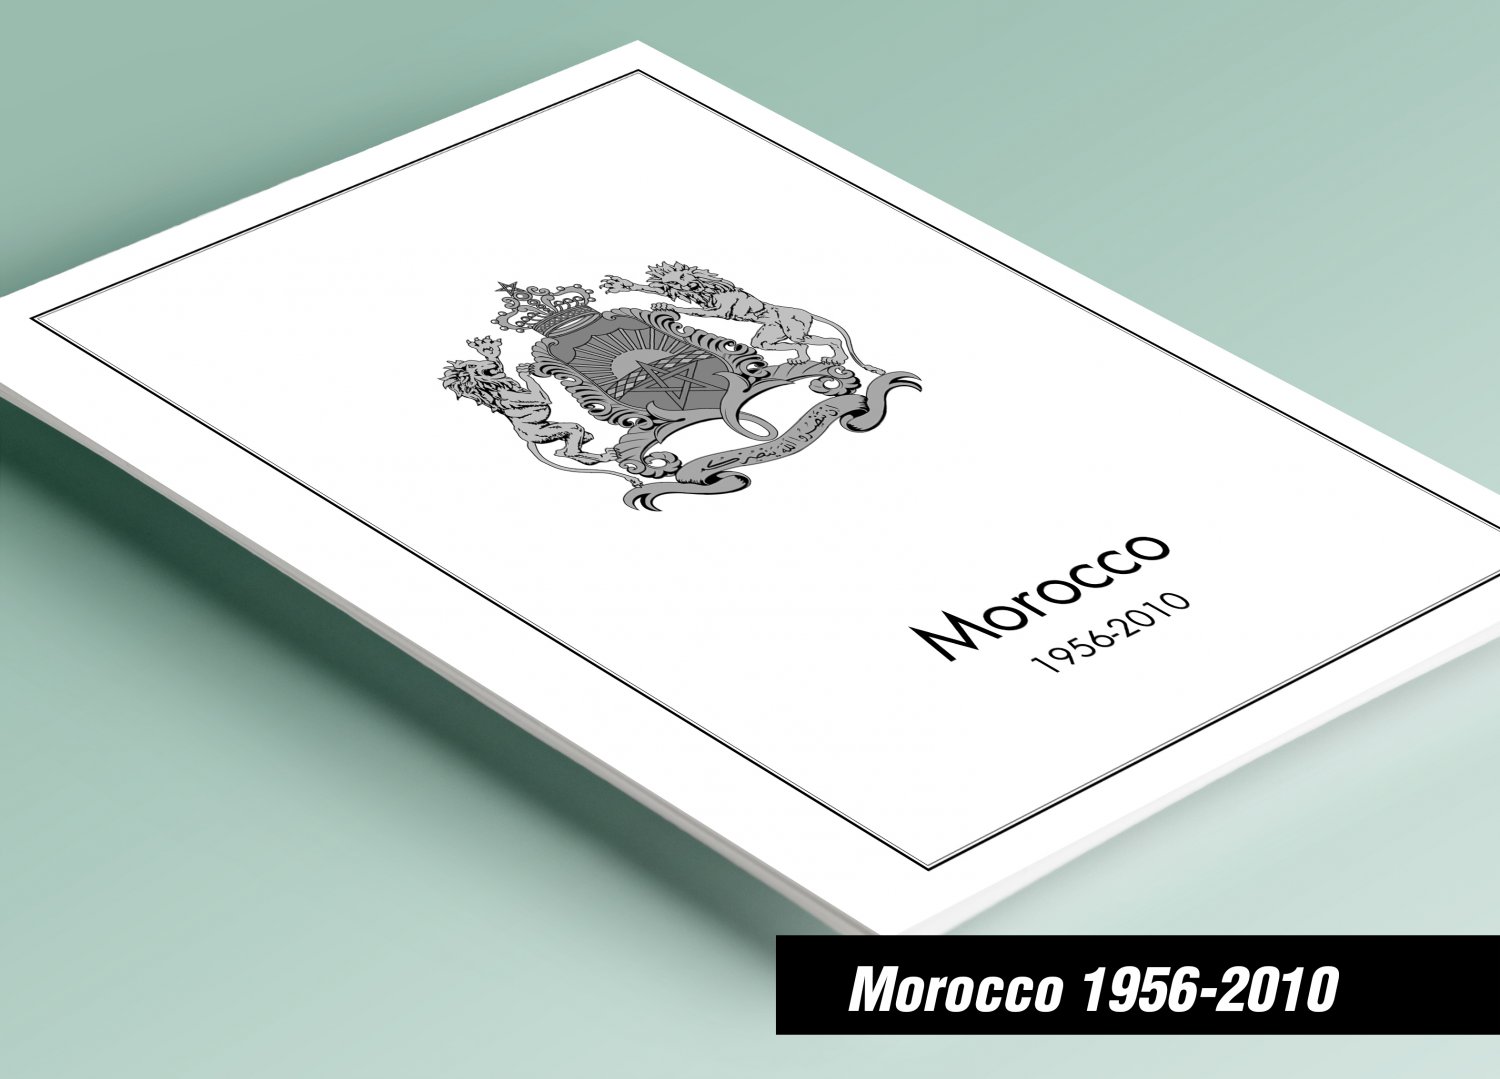 PRINTED MOROCCO 1956-2010 STAMP ALBUM PAGES (137 pages)